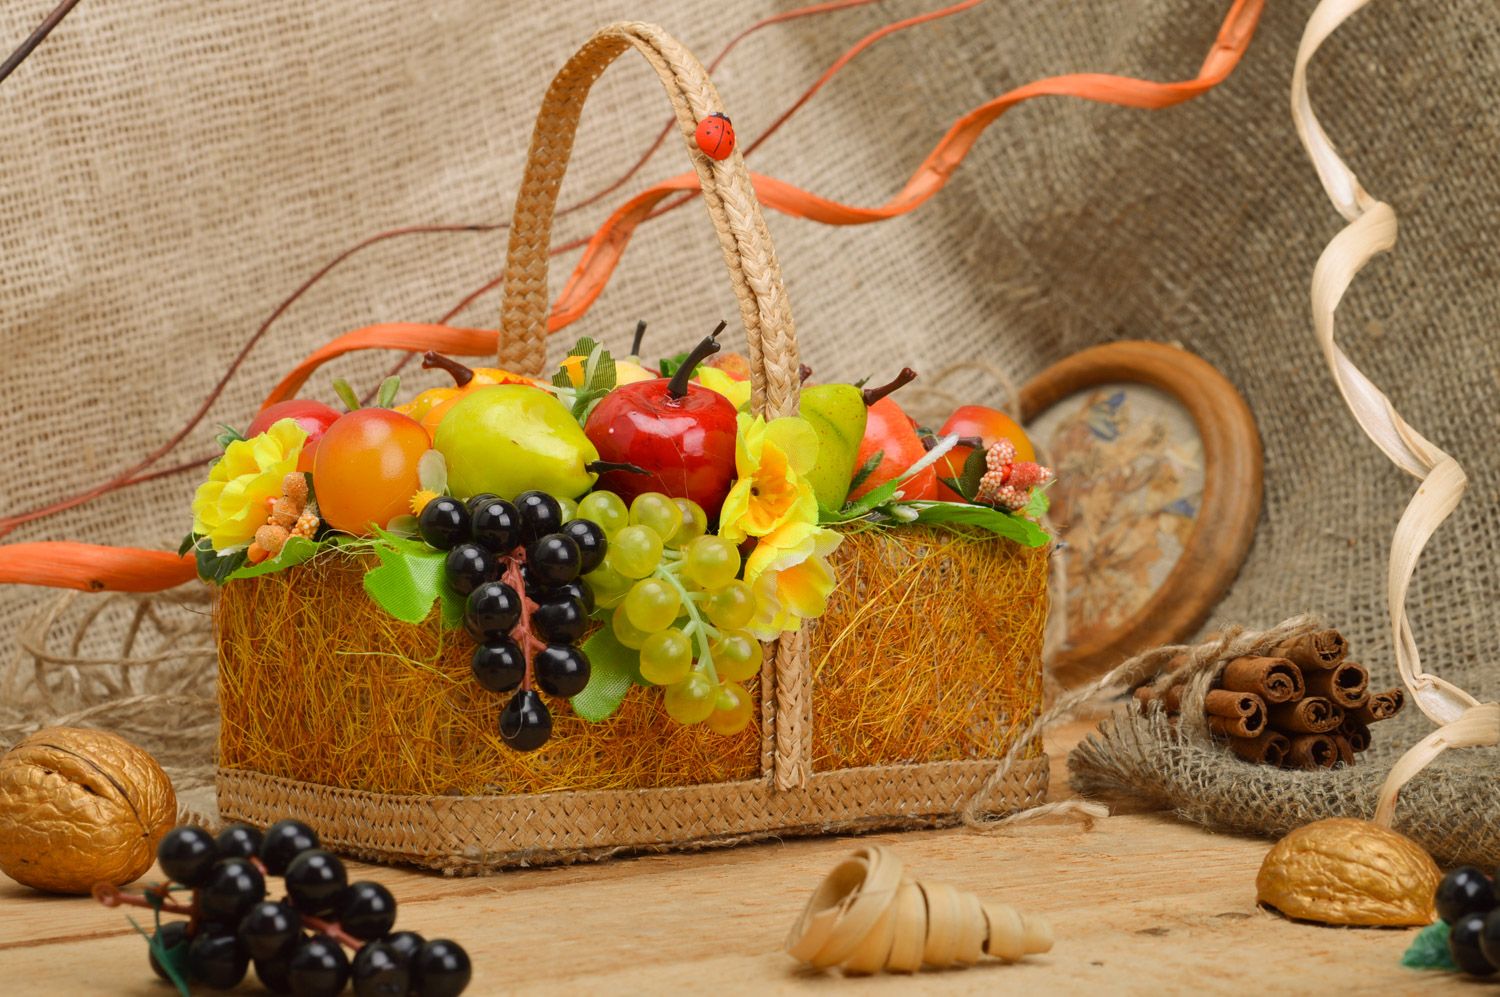 Large handmade woven sisal basket with fruit and flowers for decor photo 1